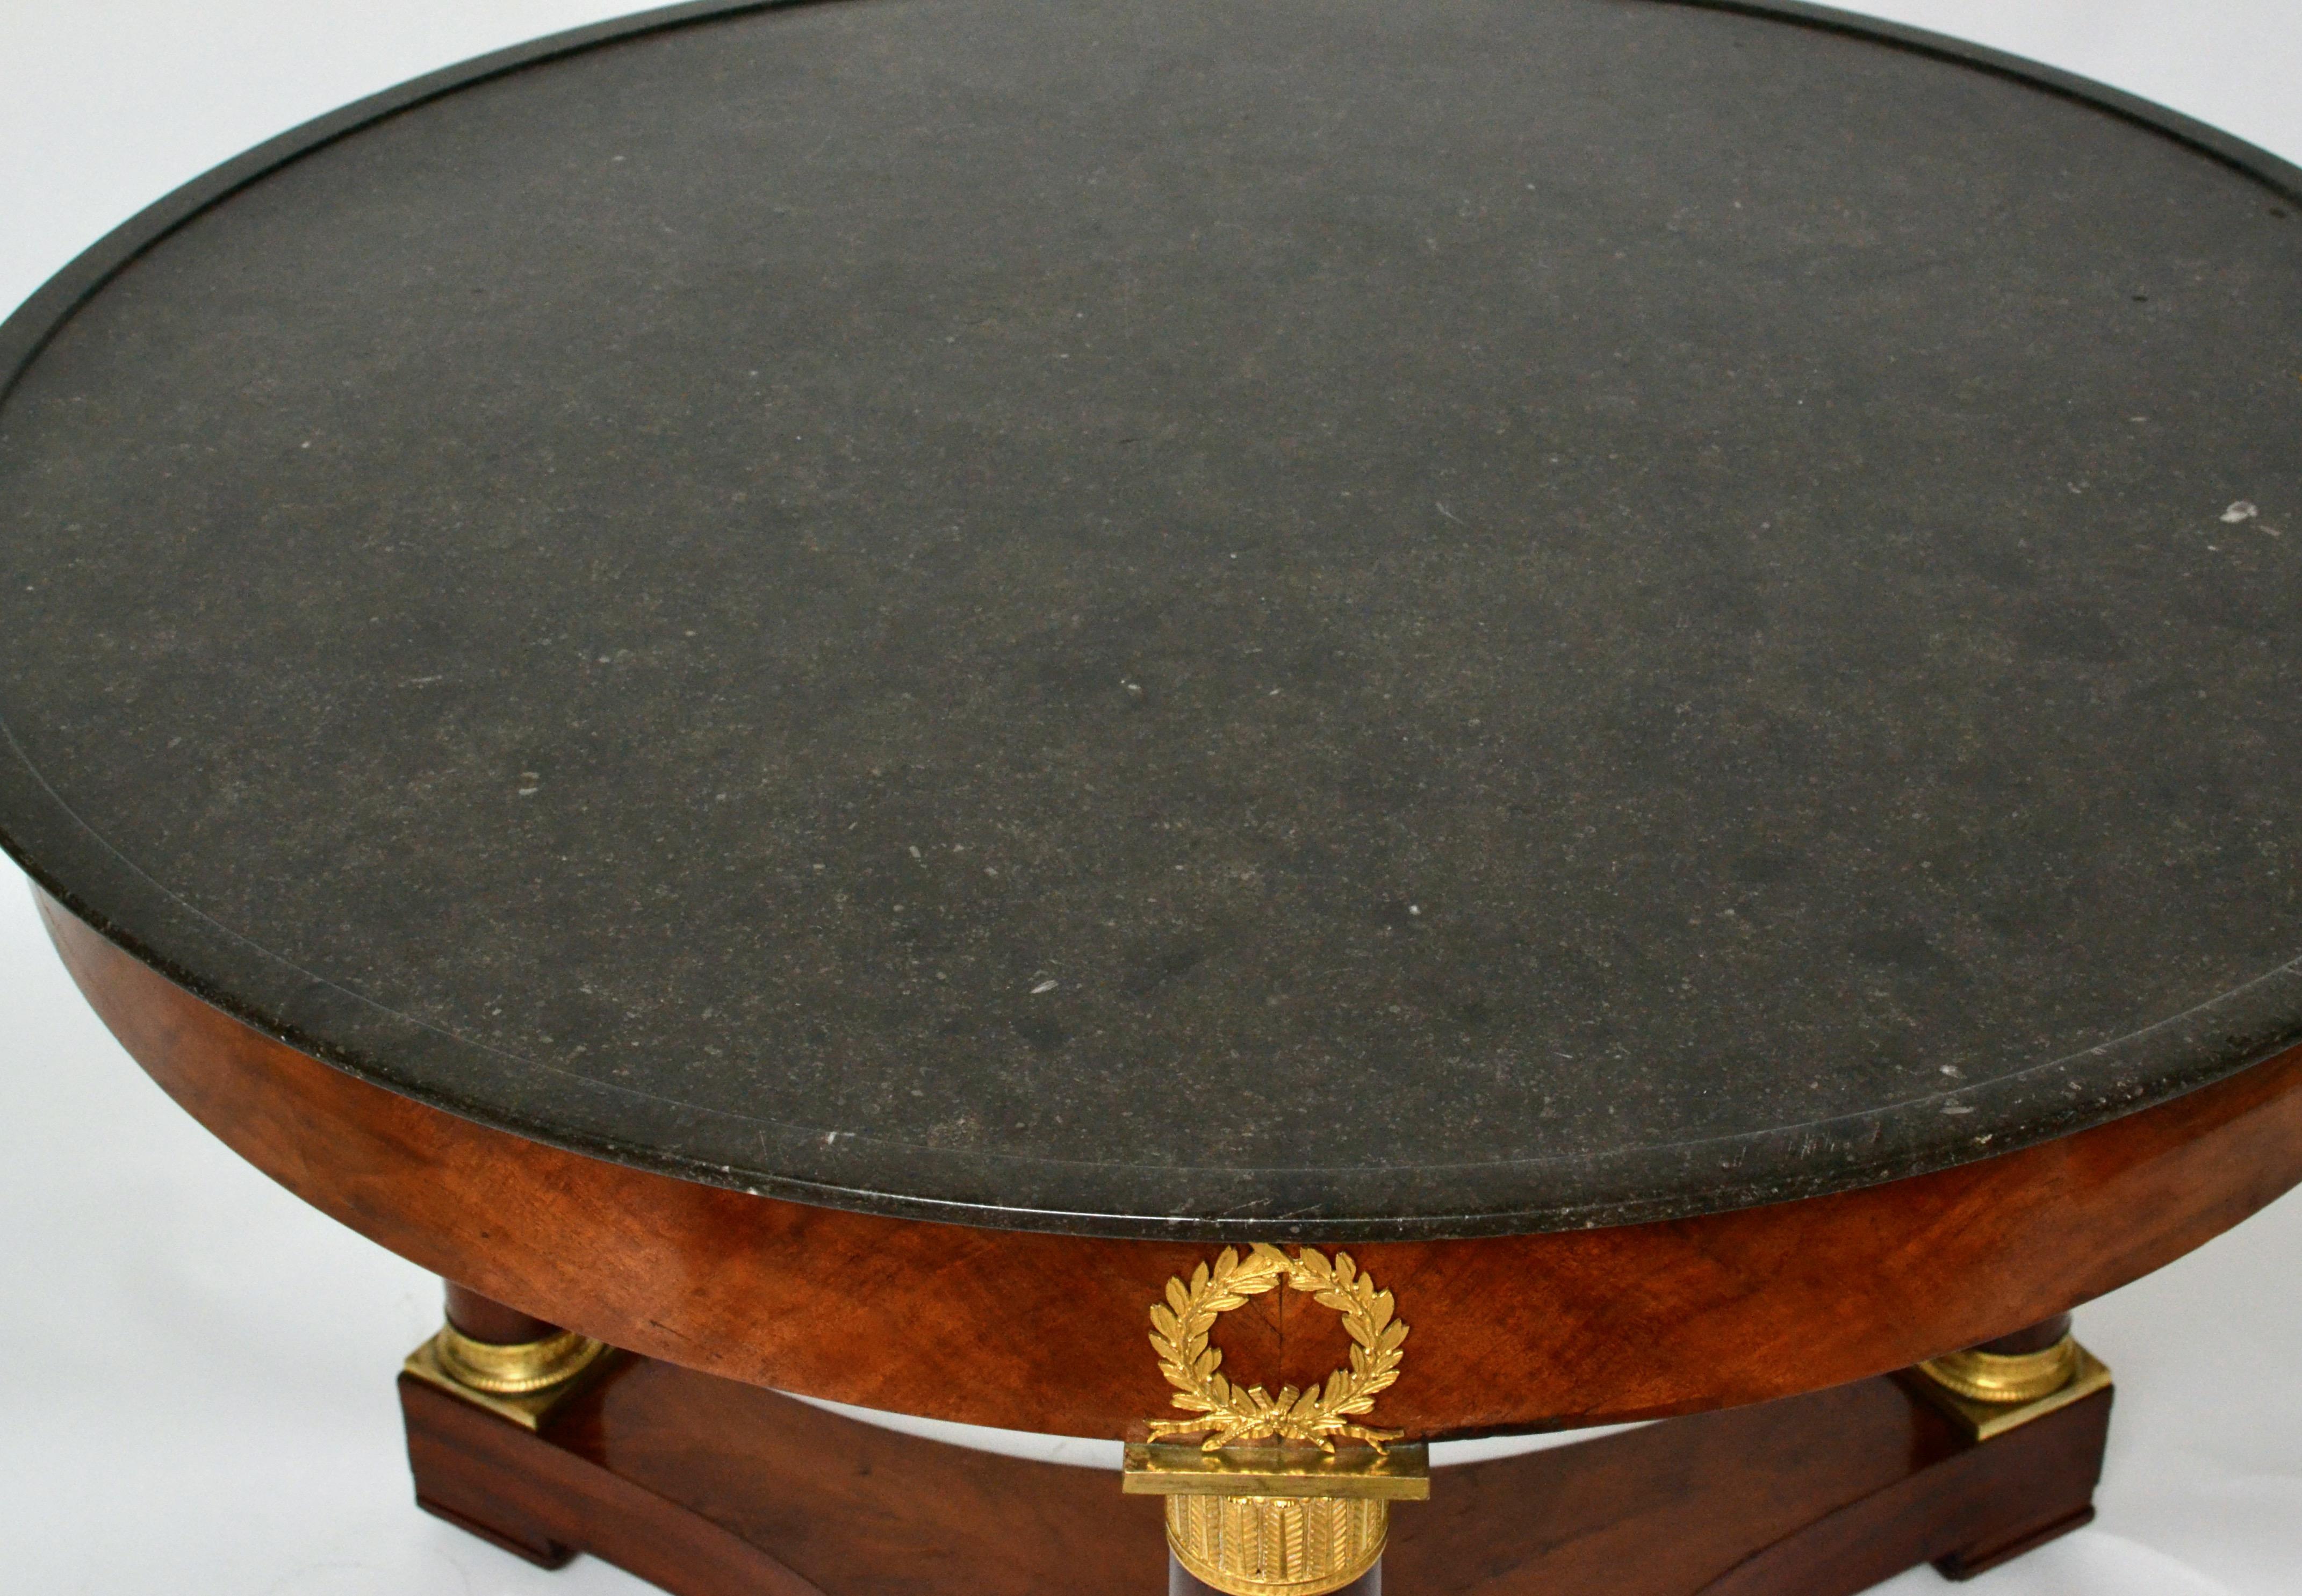 Mahogany Empire Gueridon or Center Table With Black Marble Top With Gilt Bronze Mounts.